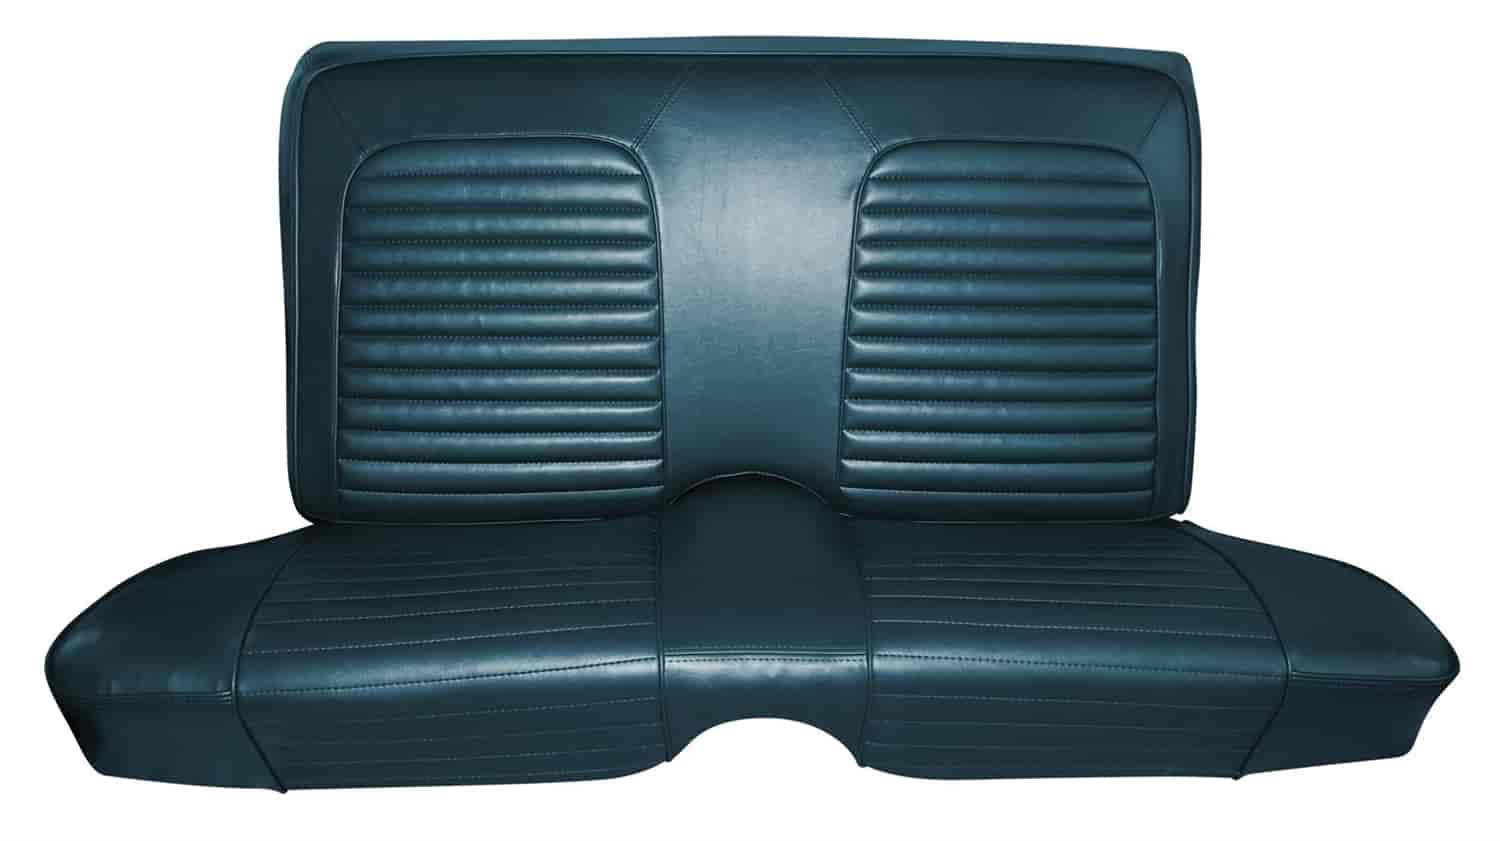 1963 Ford Falcon Futura 2-Door Sedan Interior Rear Bench Seat Upholstery for Vehicles with a Front Bench Seat Upholstery Set